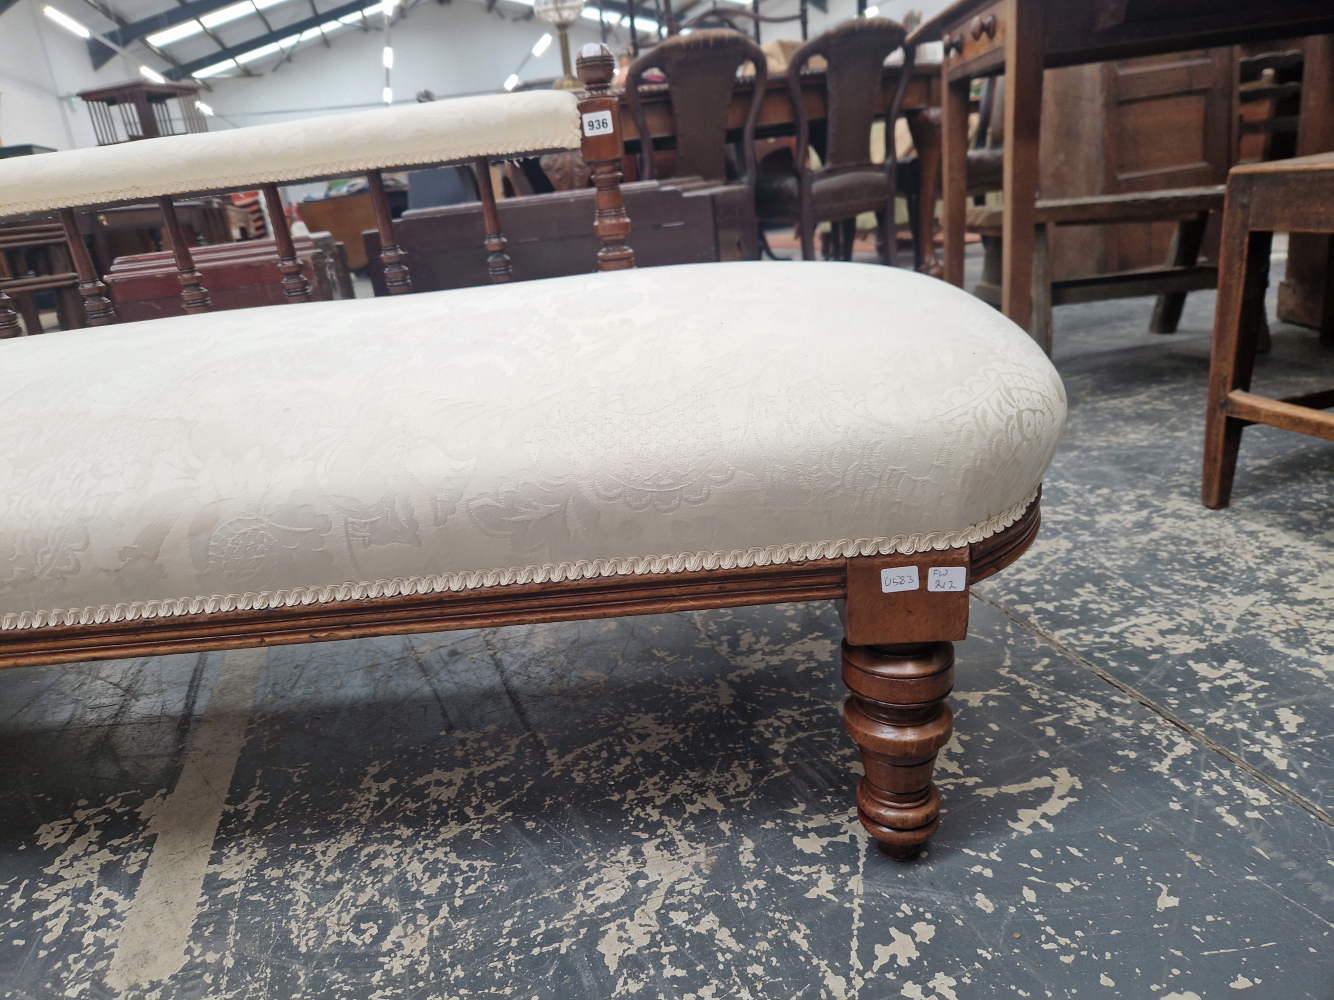 AN EARLY 20th C. MAHOGANY CHAISE LONGUE UPHOLSTERED IN WHITE DAMASK, ONE LONG SIDE WITH A BALUSTRADE - Image 4 of 6